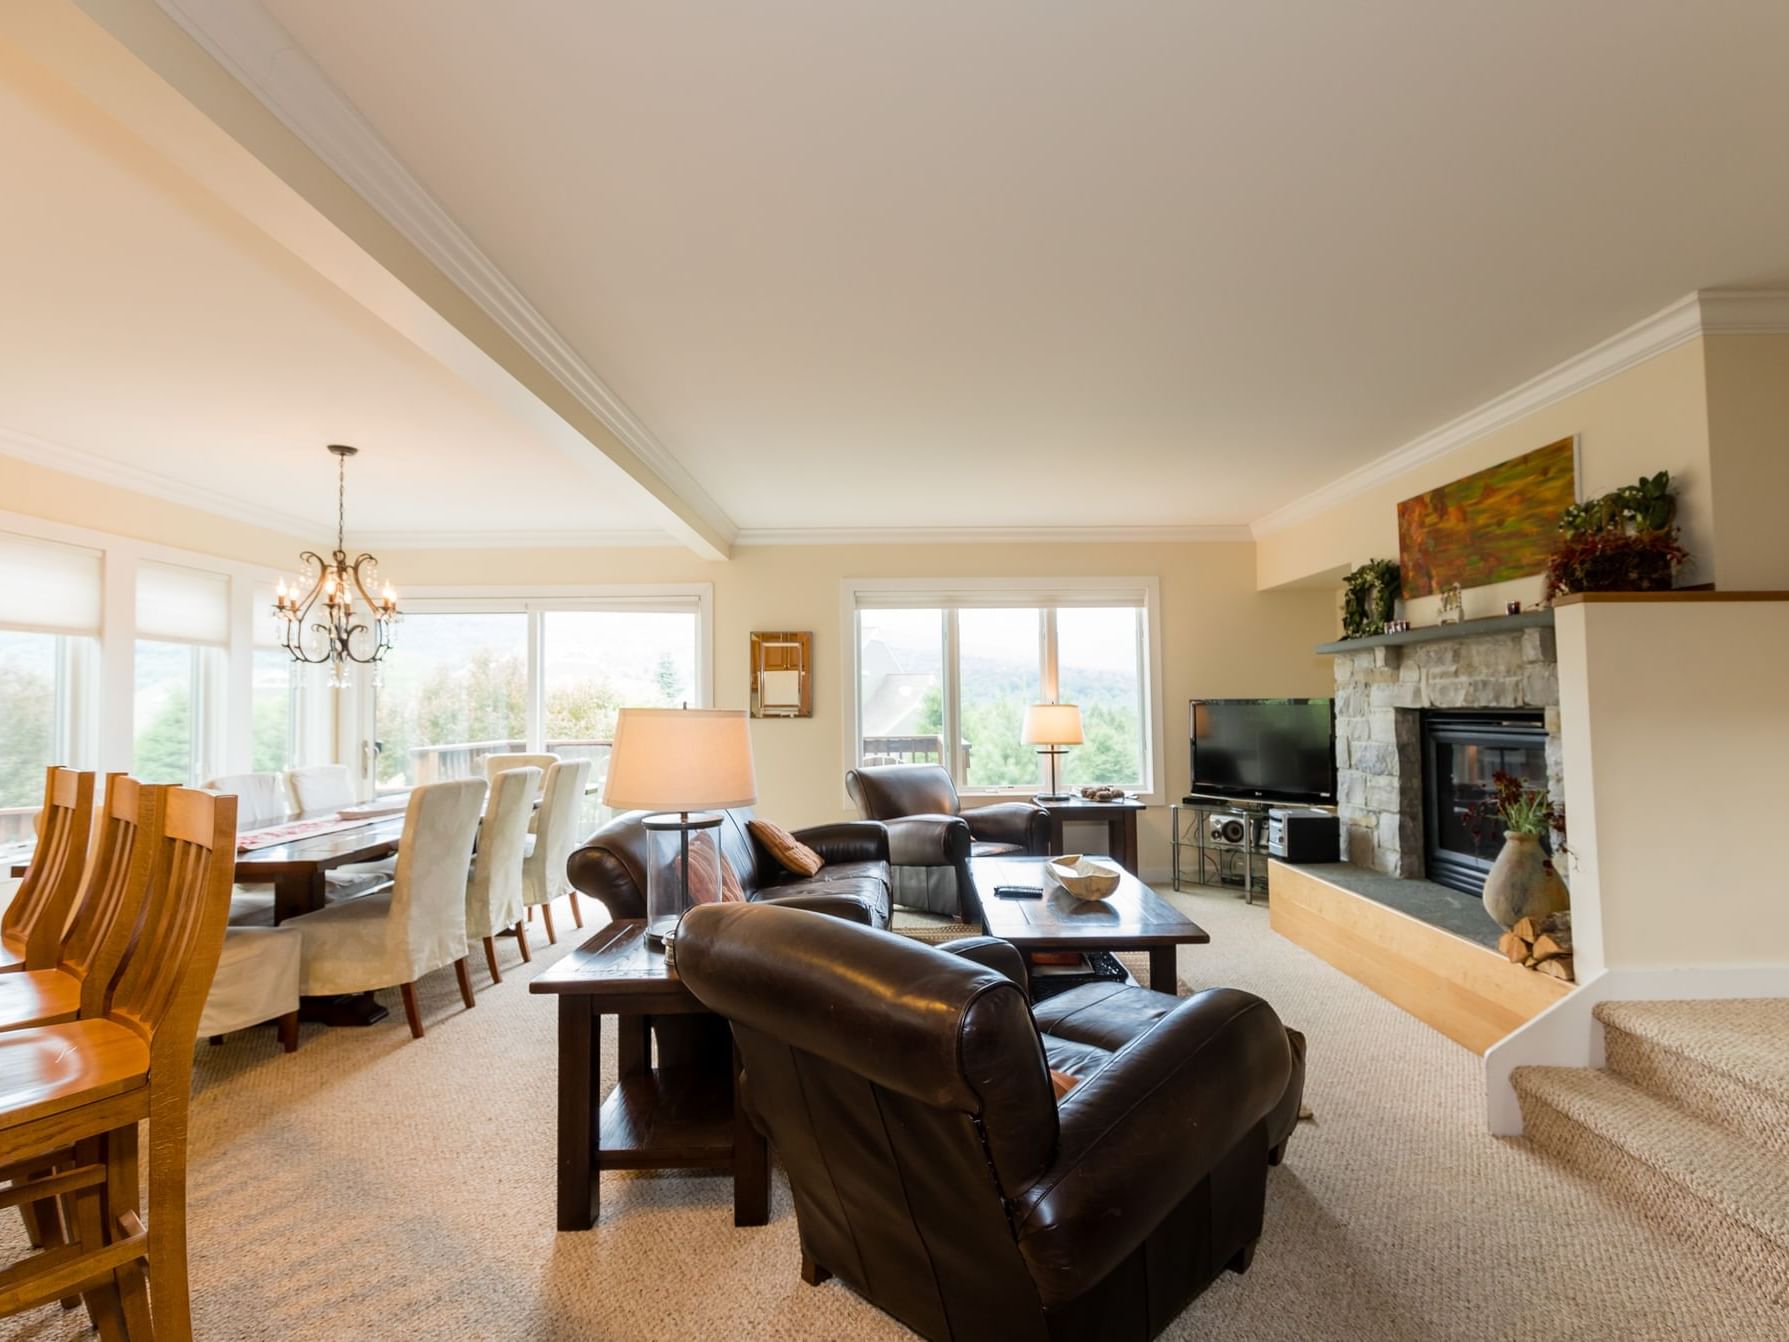 Living area and dining area in the Resort Home 646A at Topnotch Stowe Resort